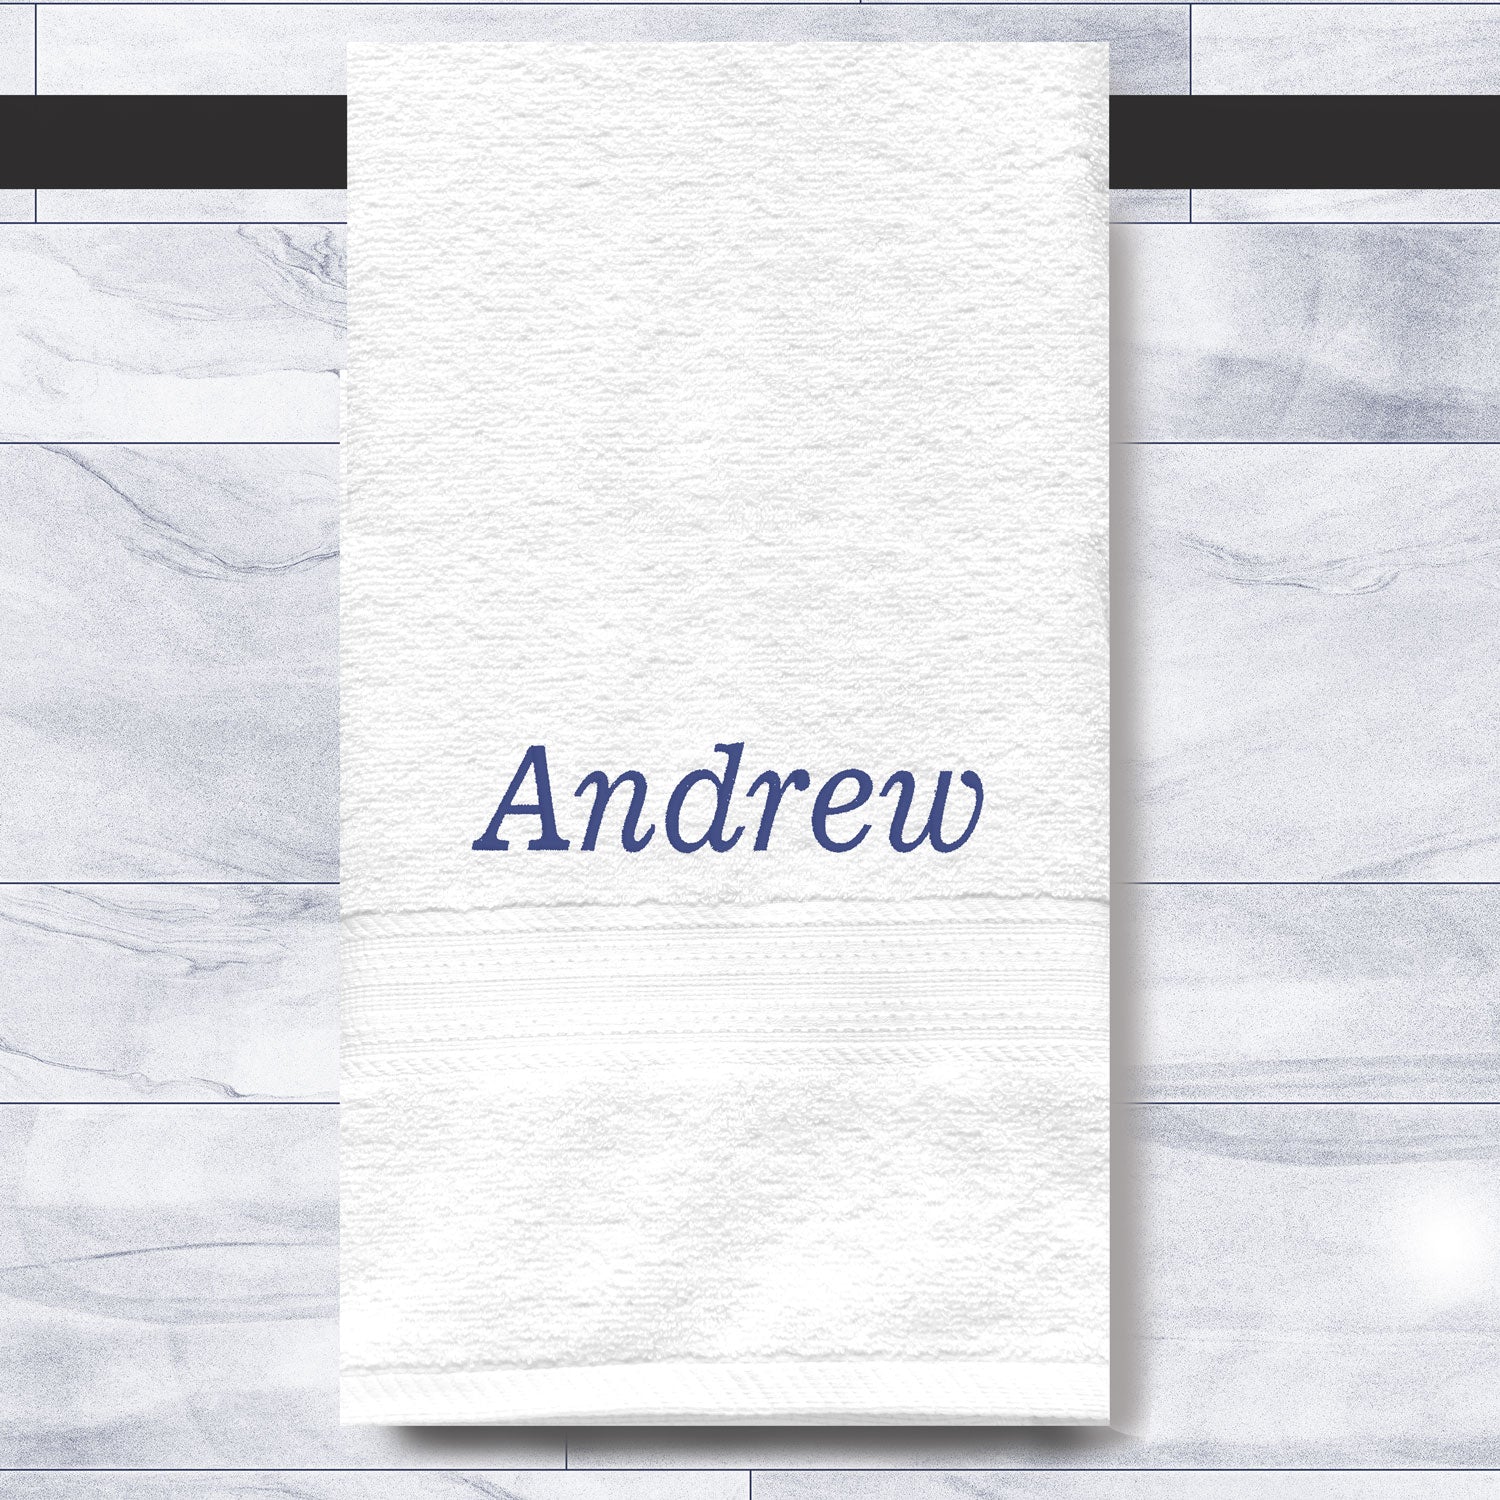 Bathroom Towel with a Custom Embroidered Name - 100% Cotton - Soft and Absorbent